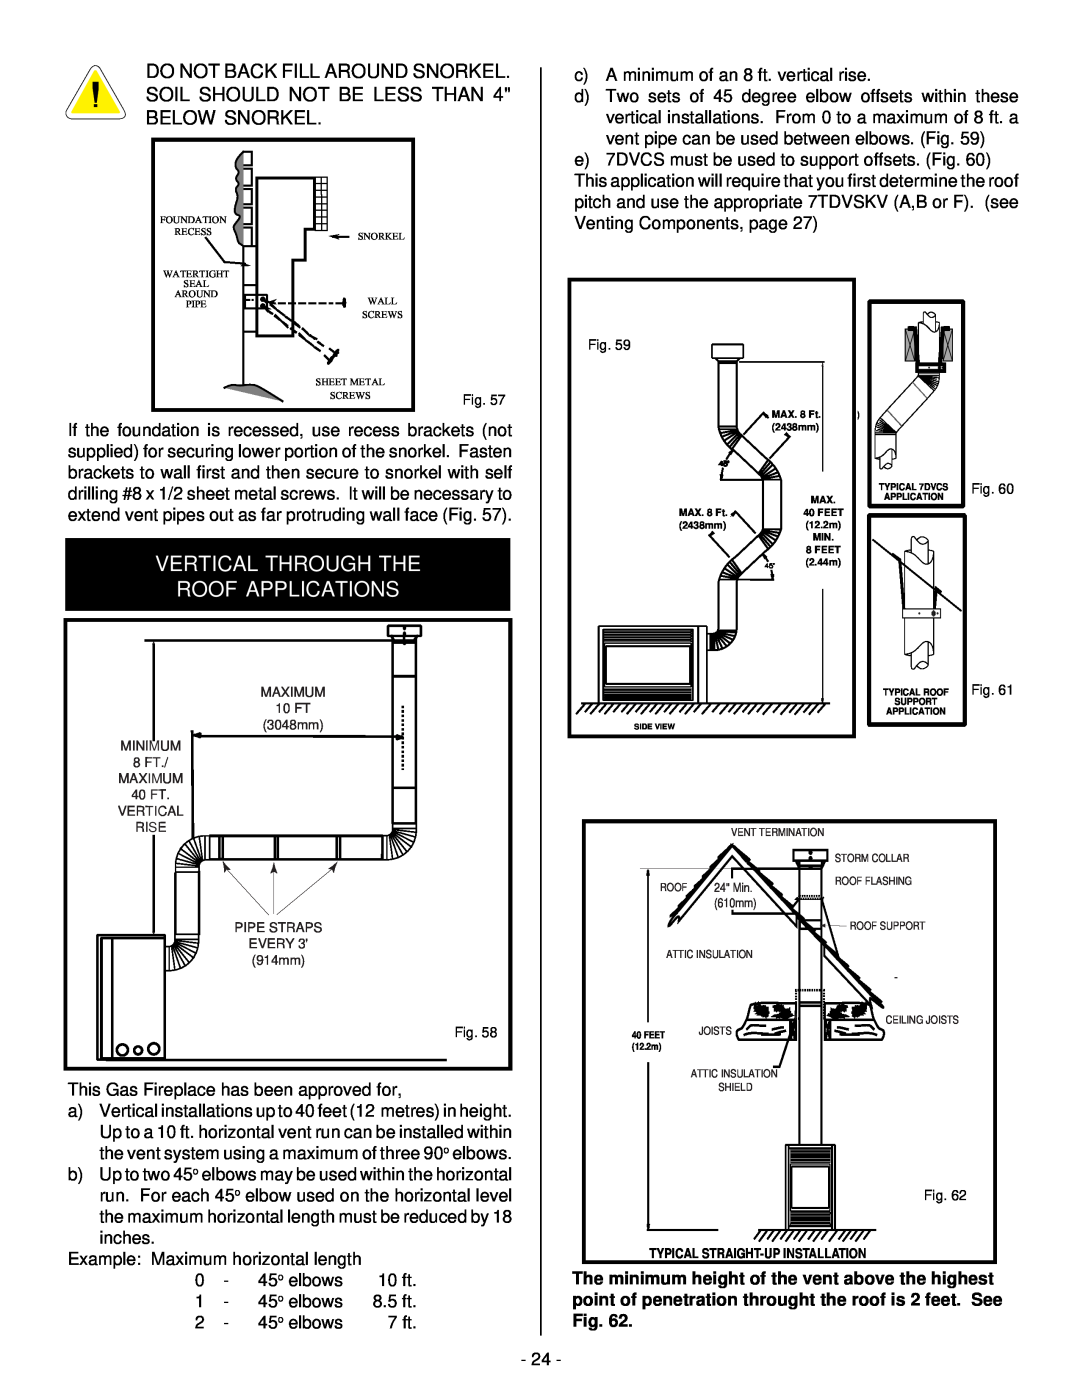 Vermont Casting BHDR36 installation instructions Vertical Through The Roof Applications 